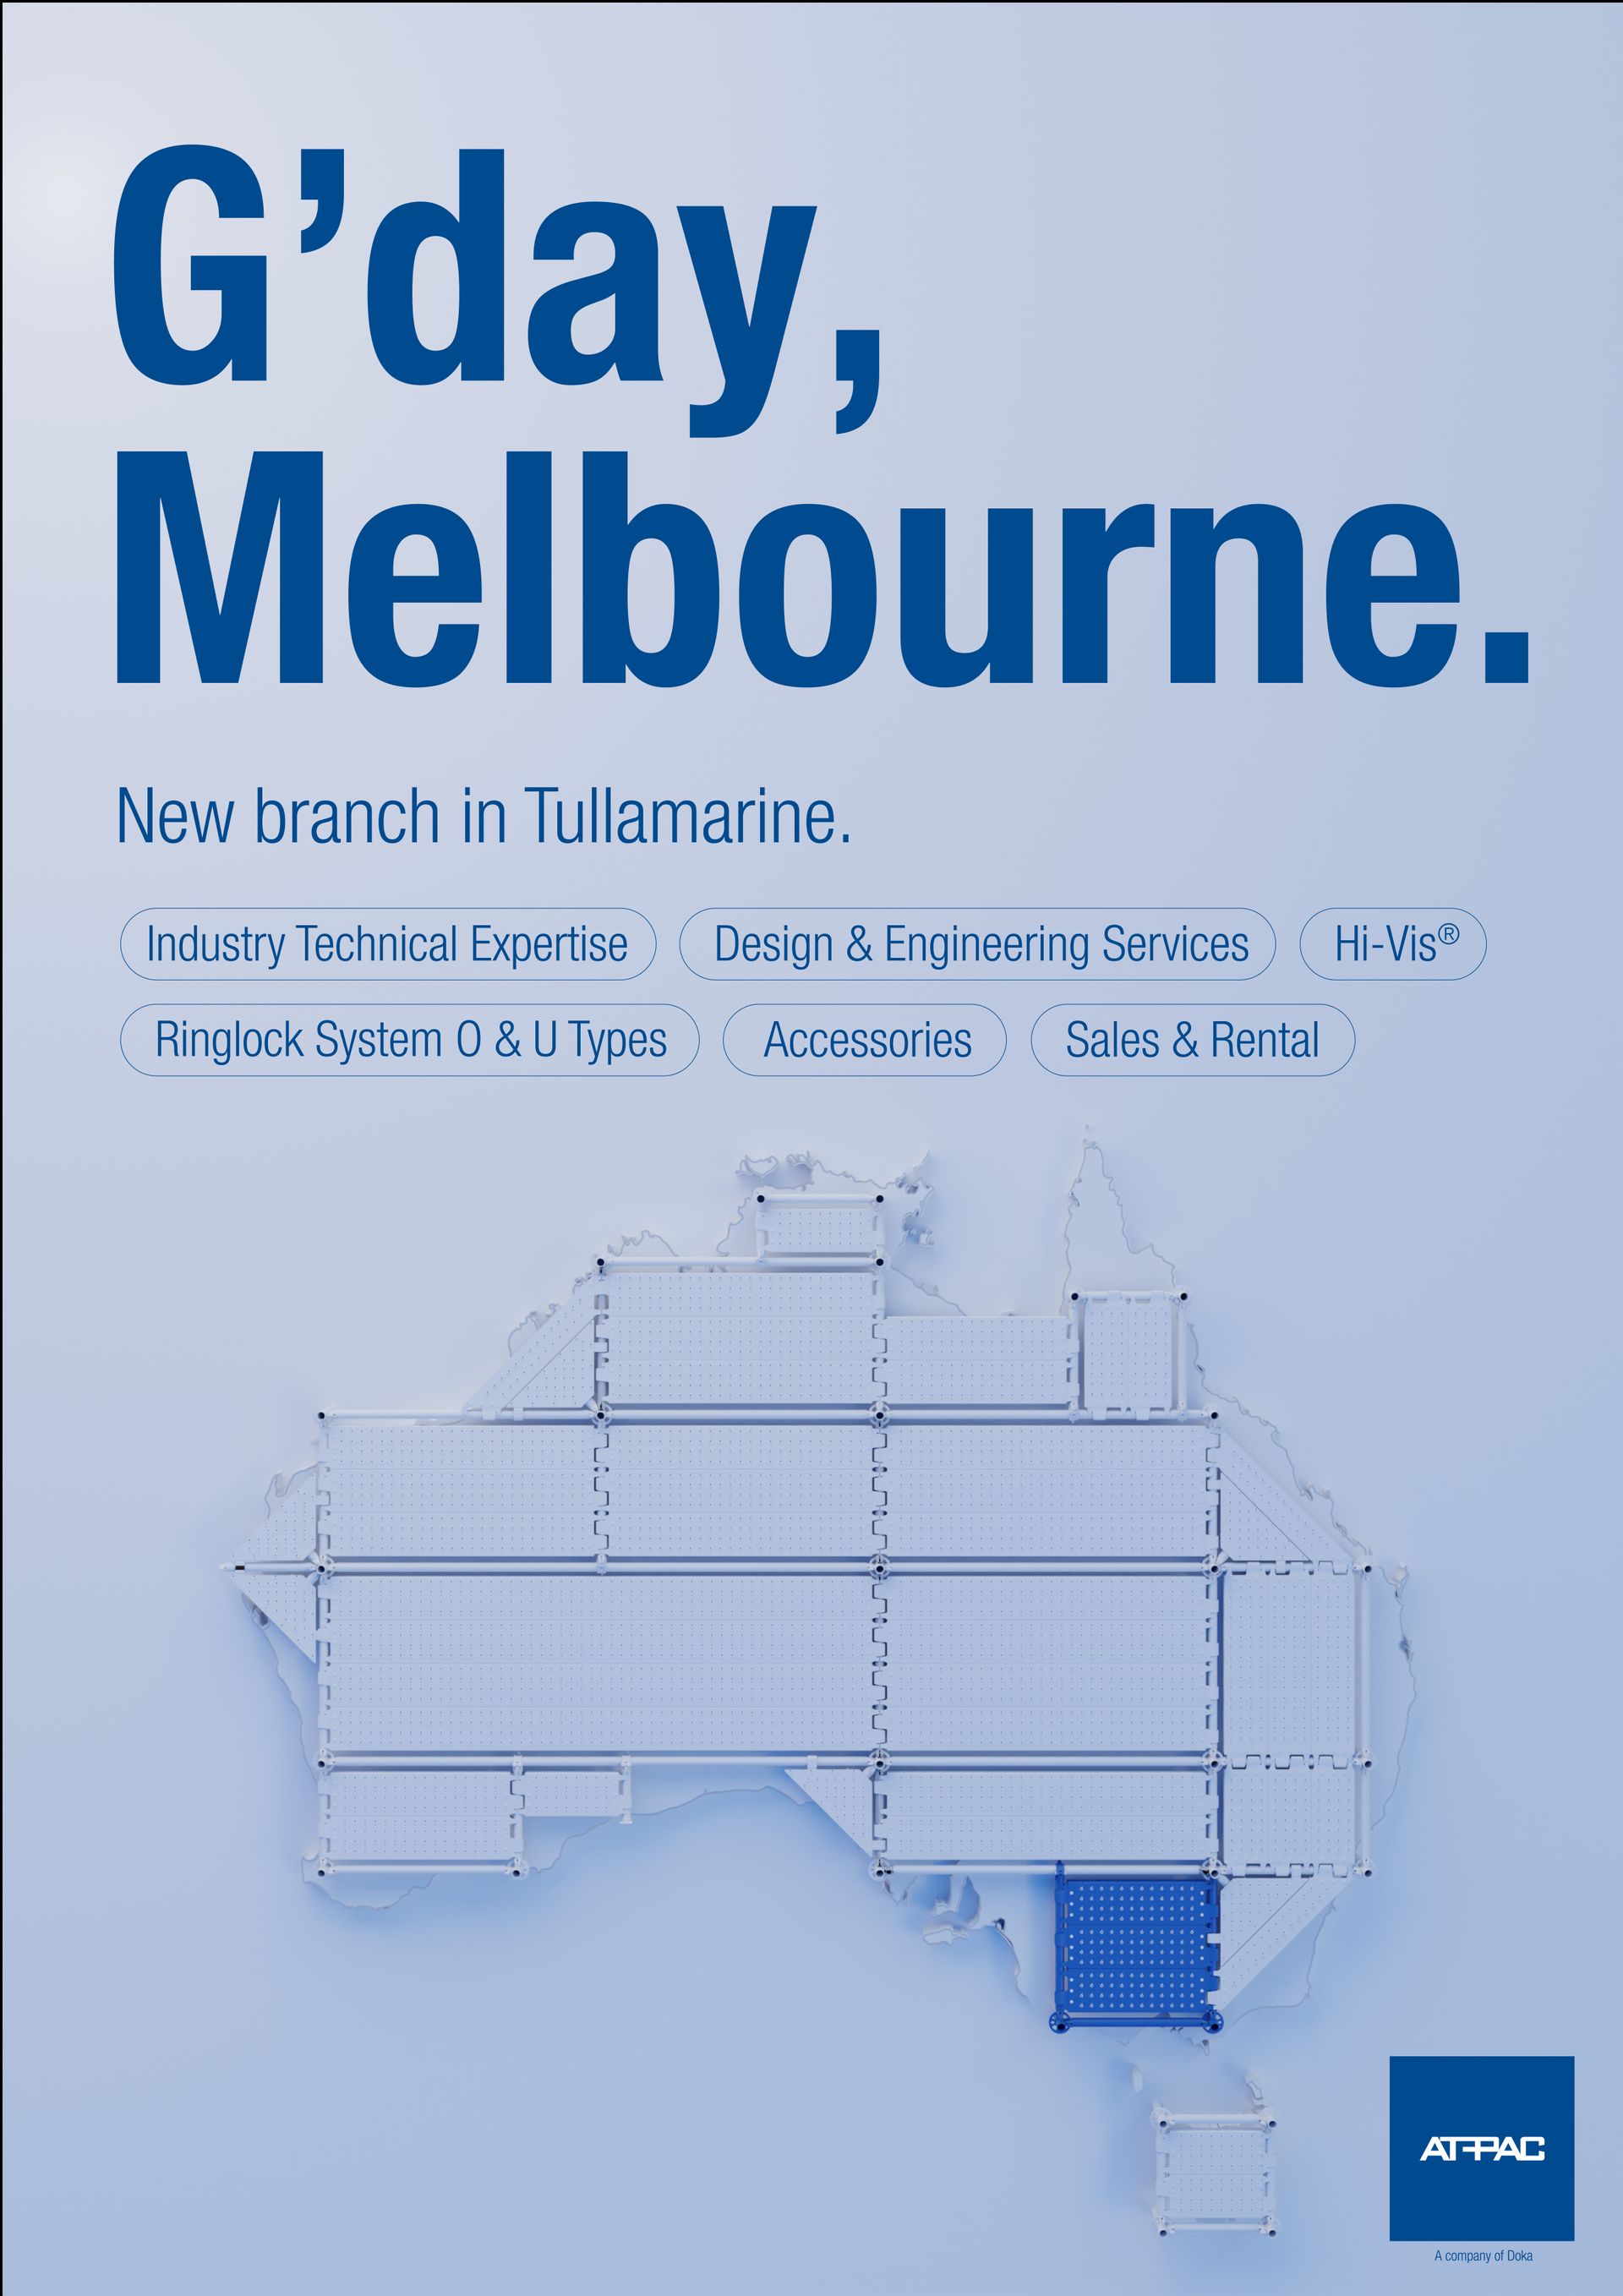 G'day Melbourne, we have a new branch in Tullamarine. 